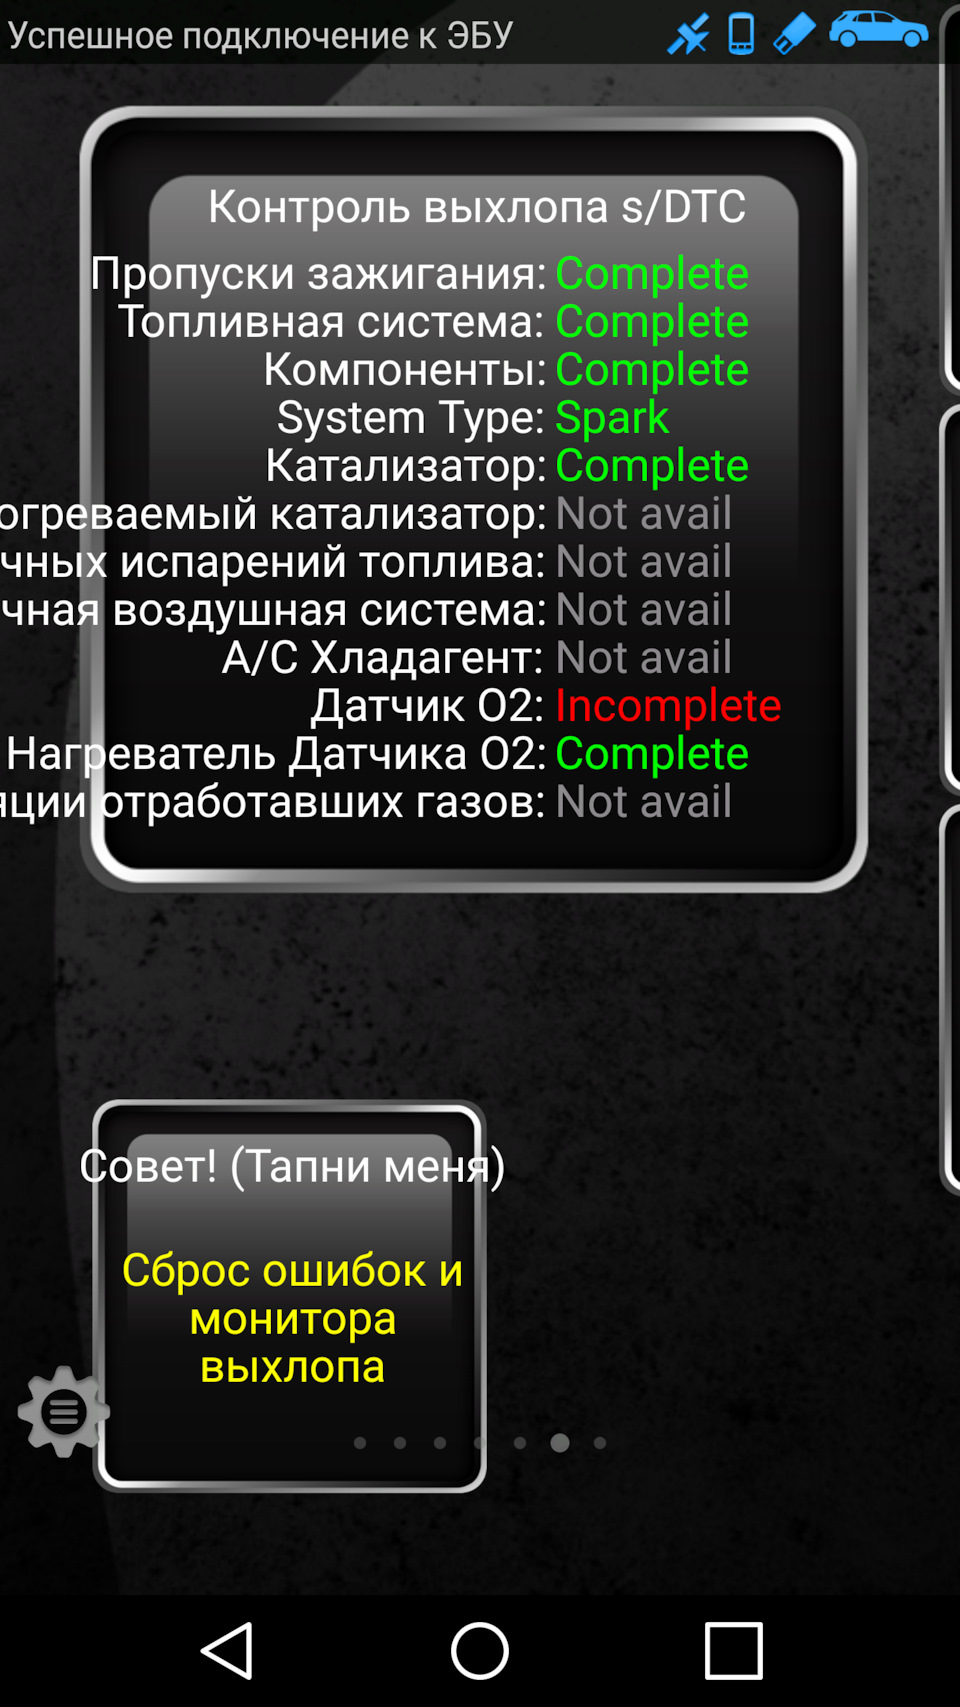 System is not available. Пропуски зажигания: complete. Пропуски зажигания complete Torque.